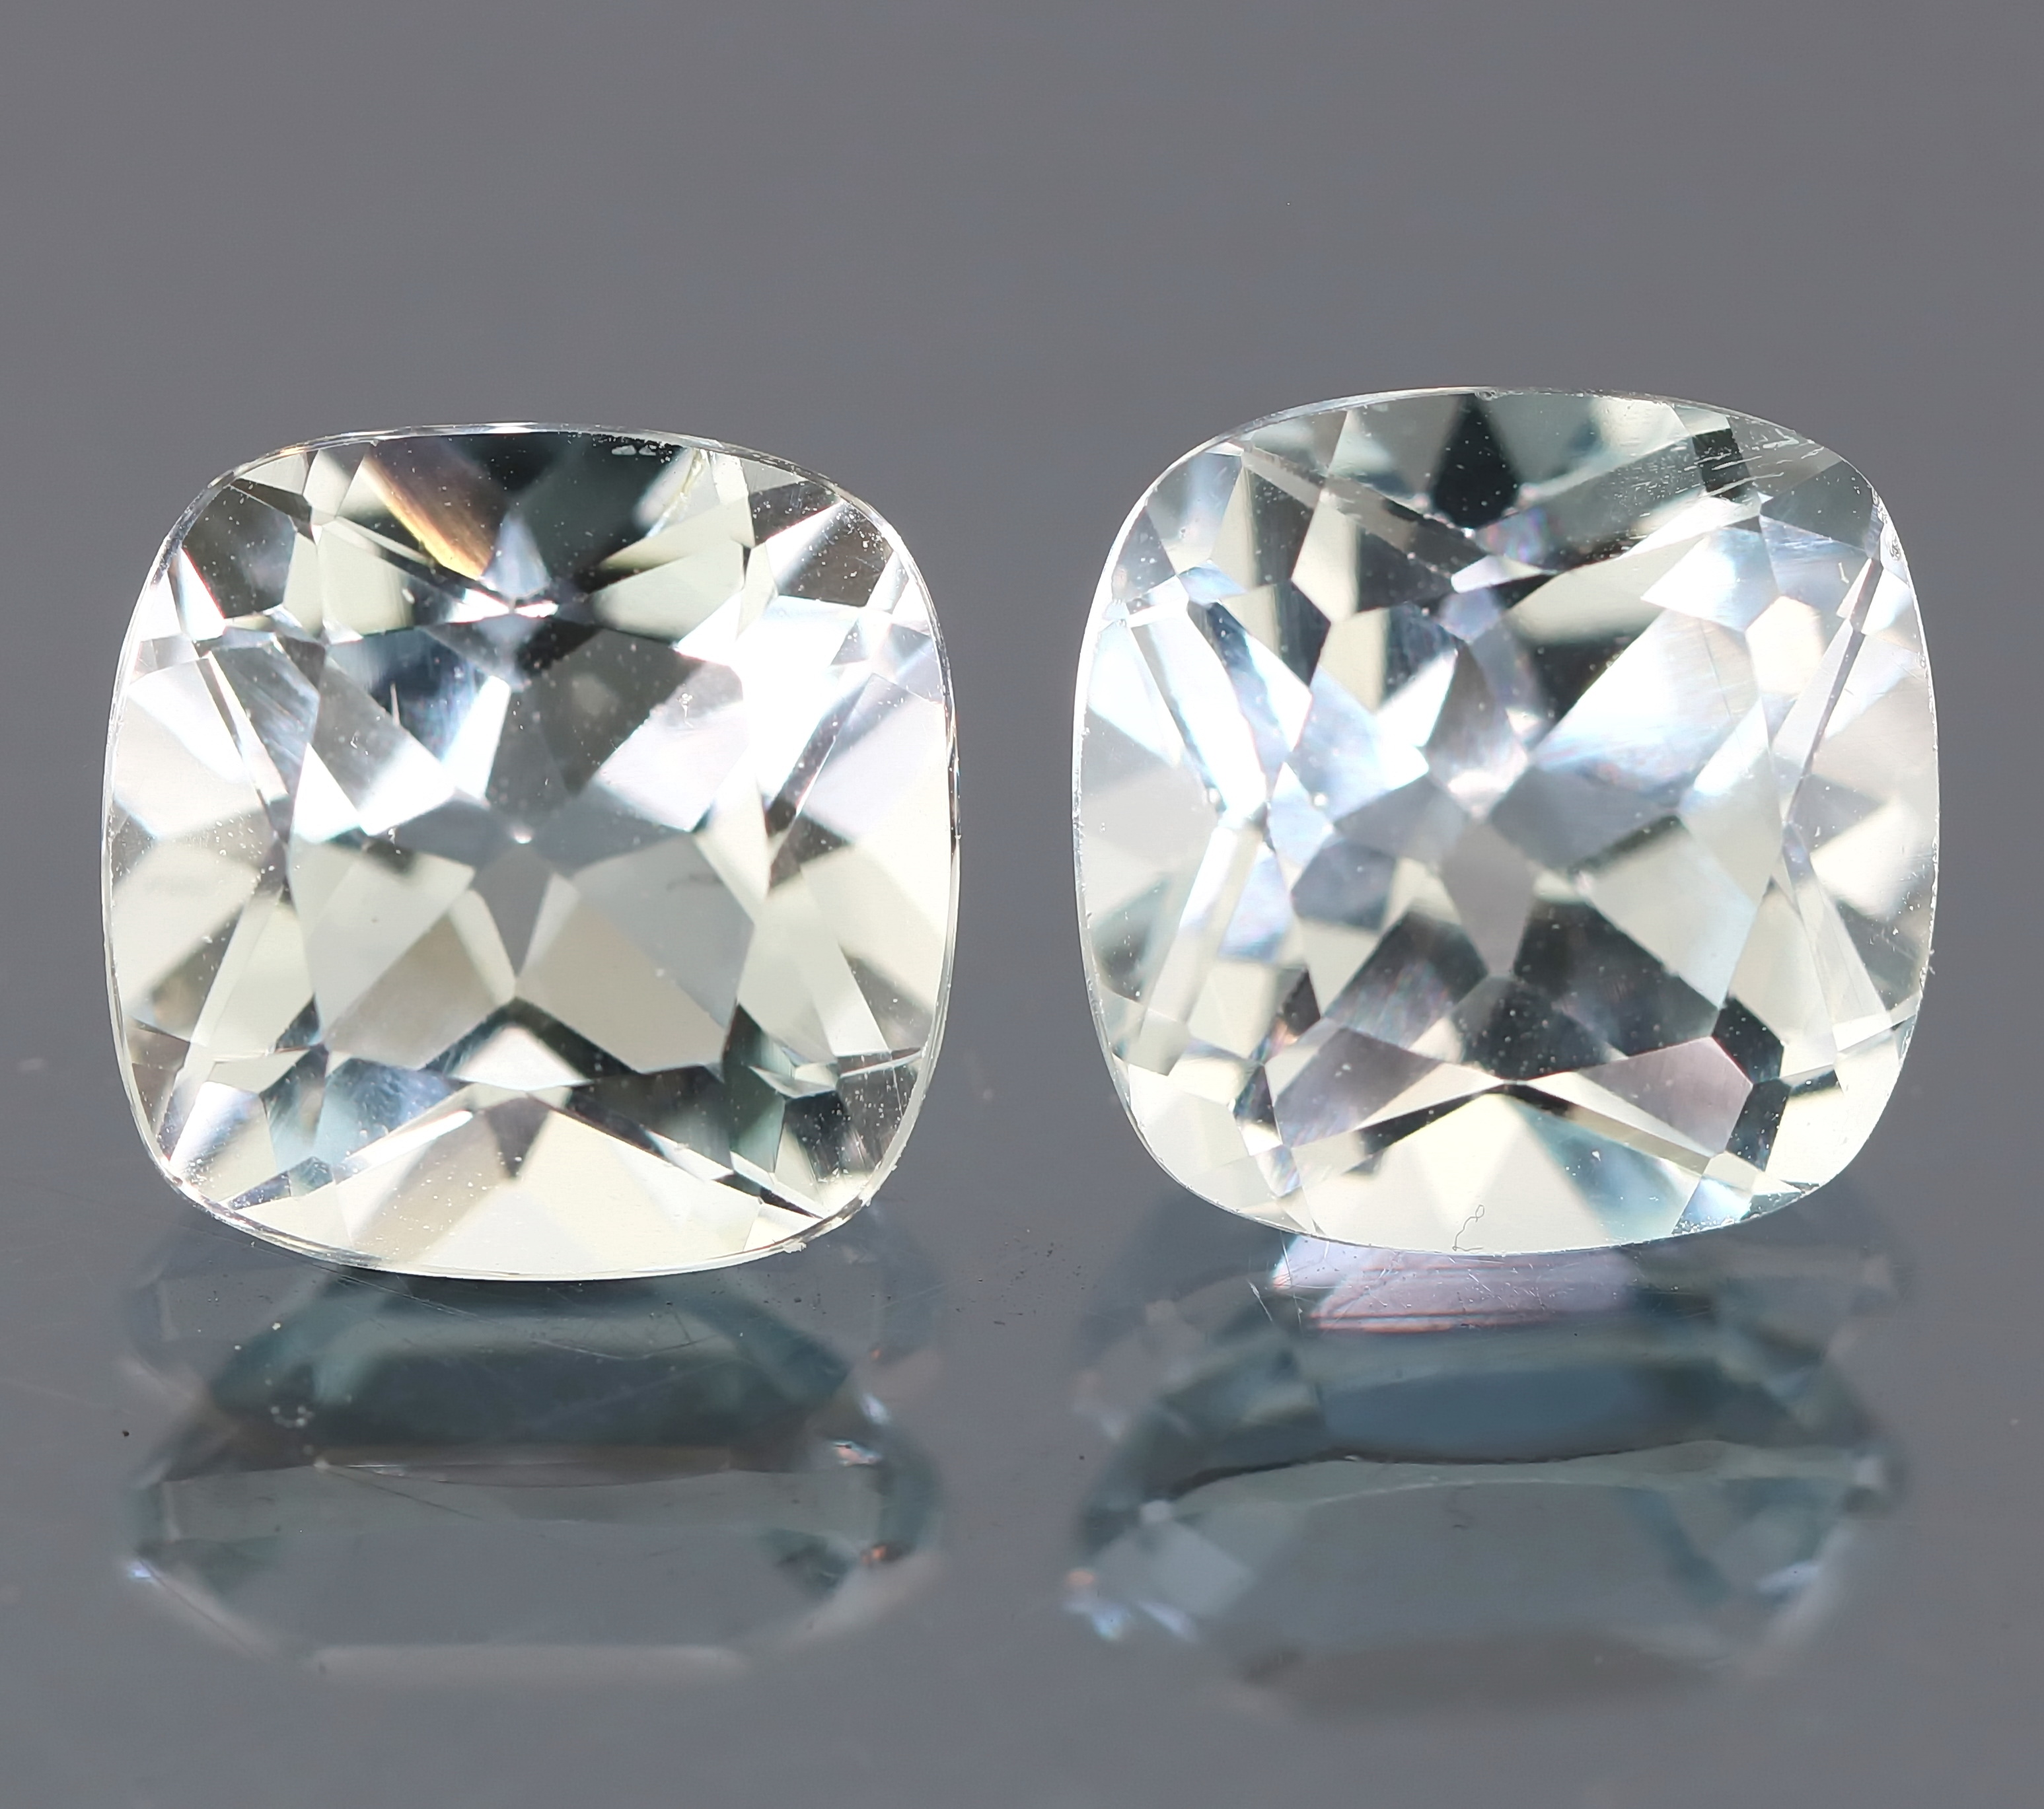 Beautifully matched UNTREATED 7.54ct Topaz pair